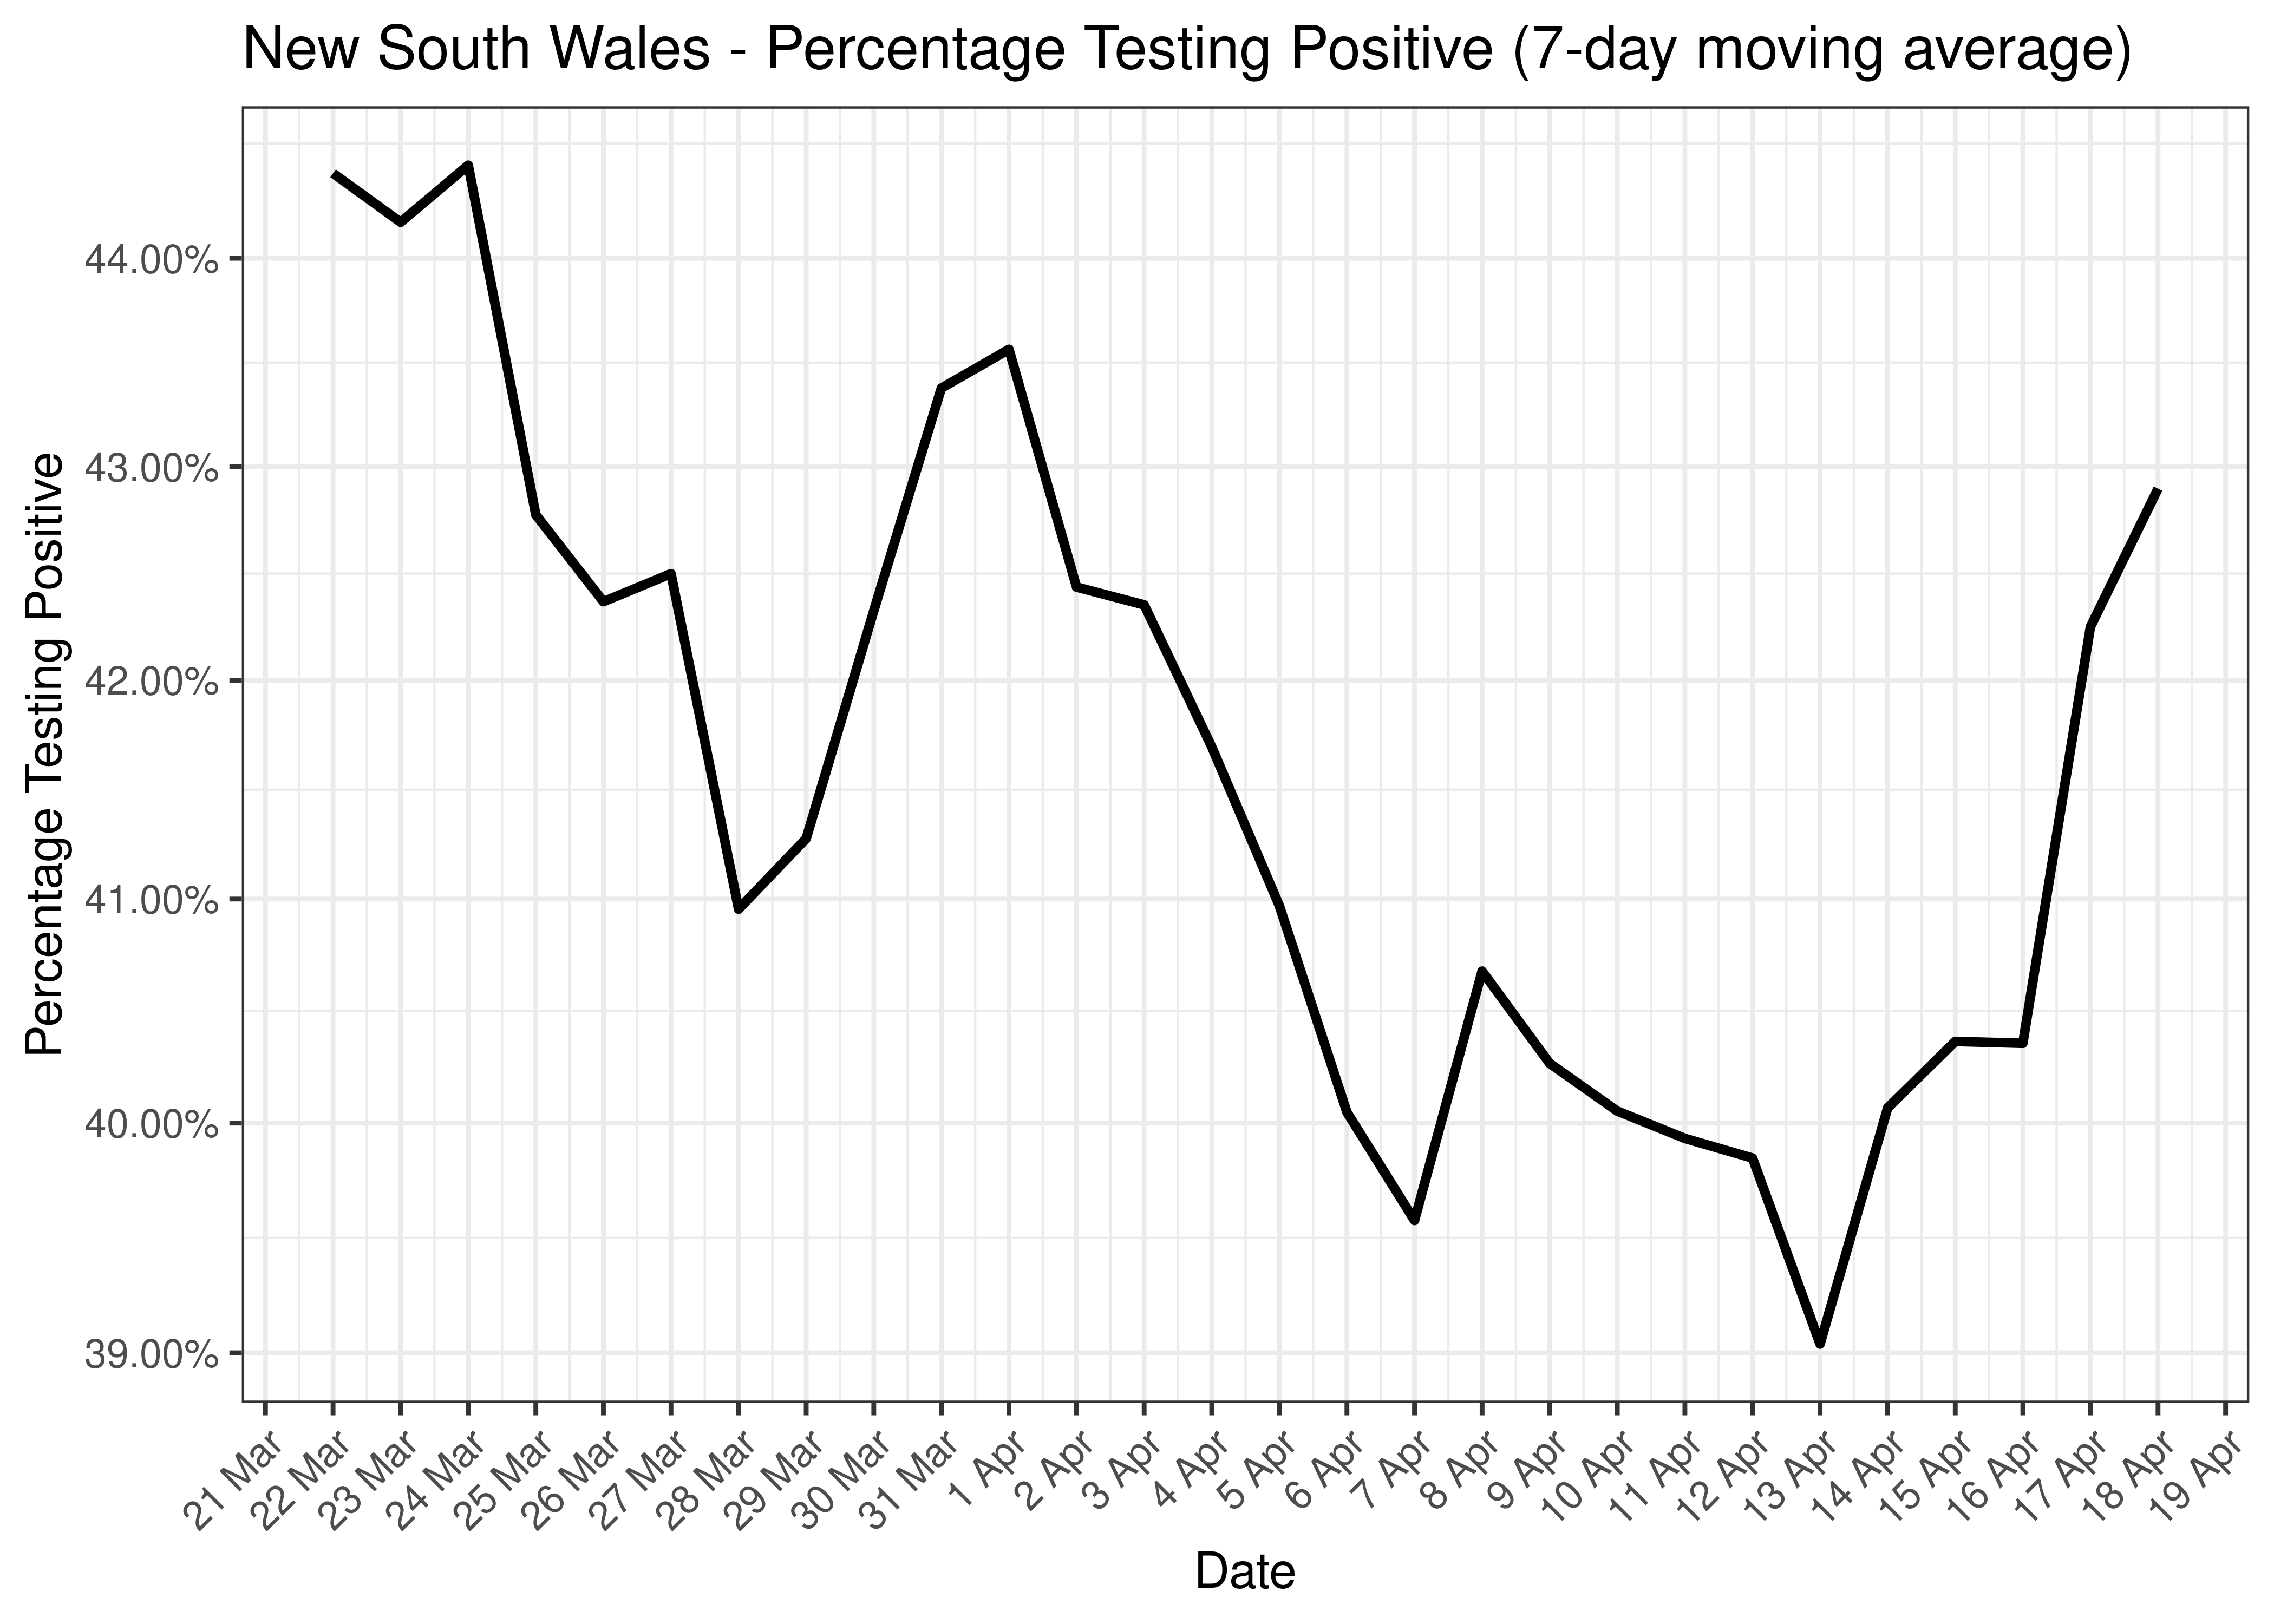 New South Wales - Percentage Testing Positive for Last 30 Days (7-day moving average)